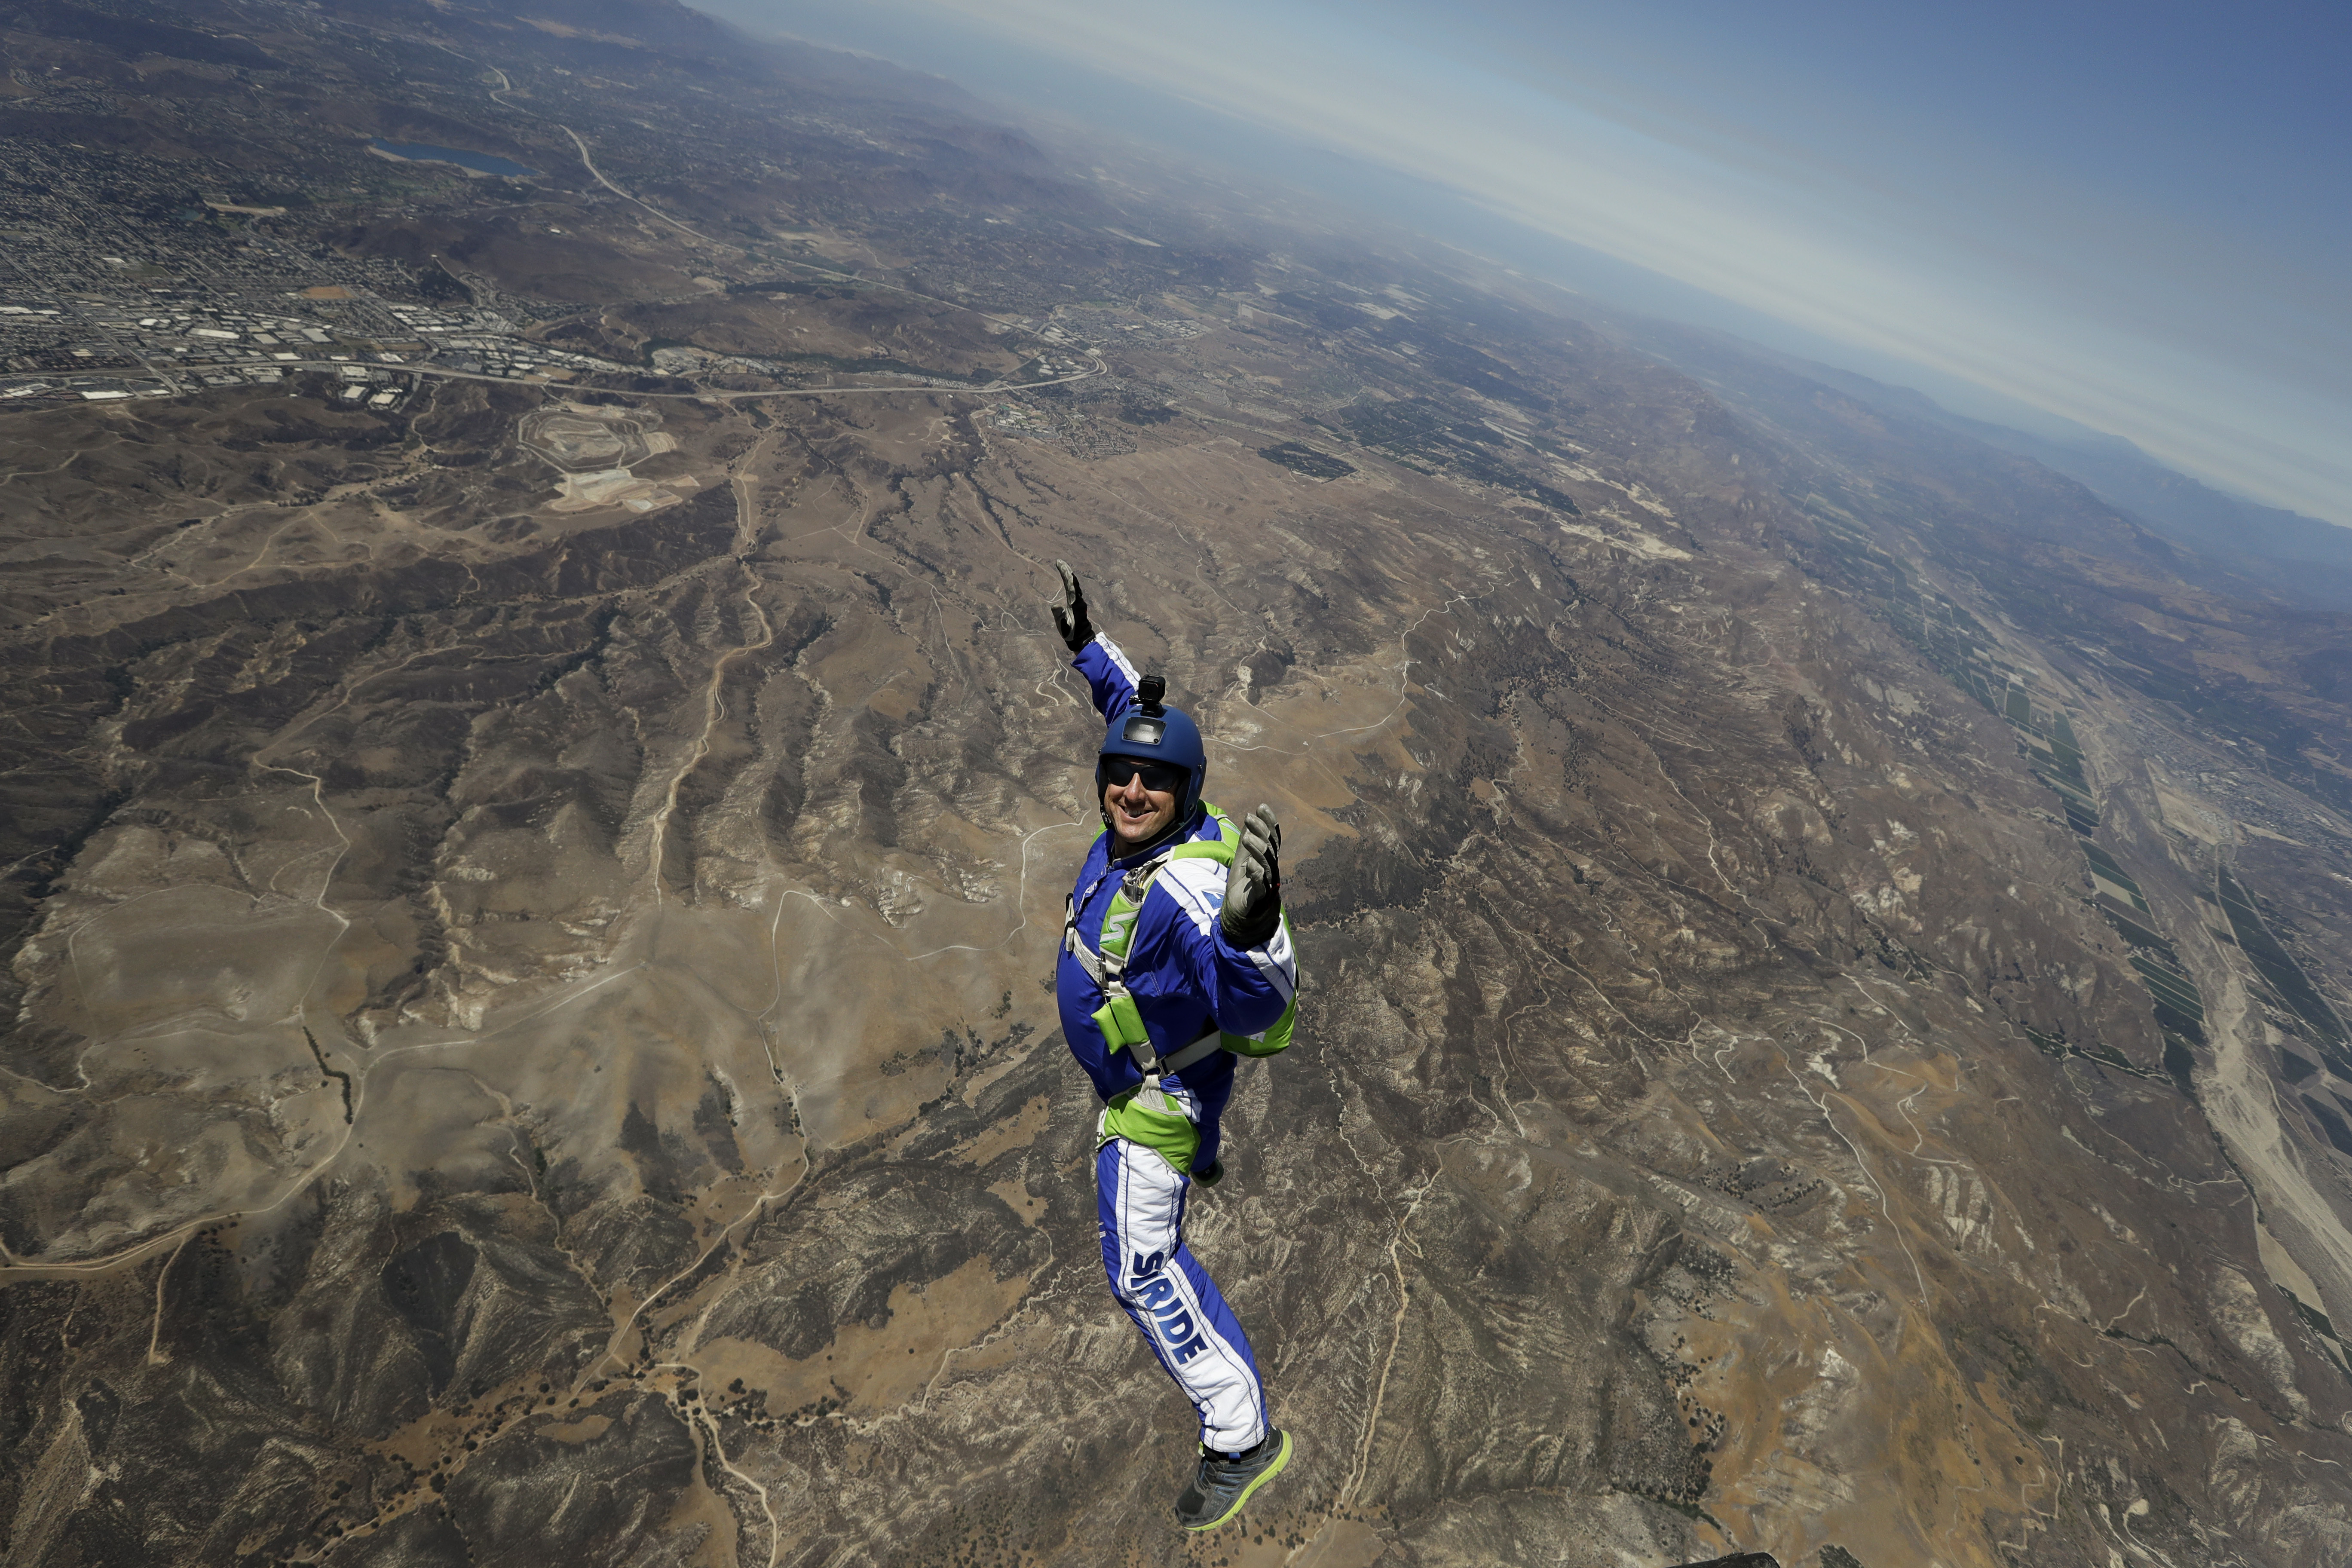 Los Angeles, CA - Skydiver Becomes First Person To Jump And Land ...